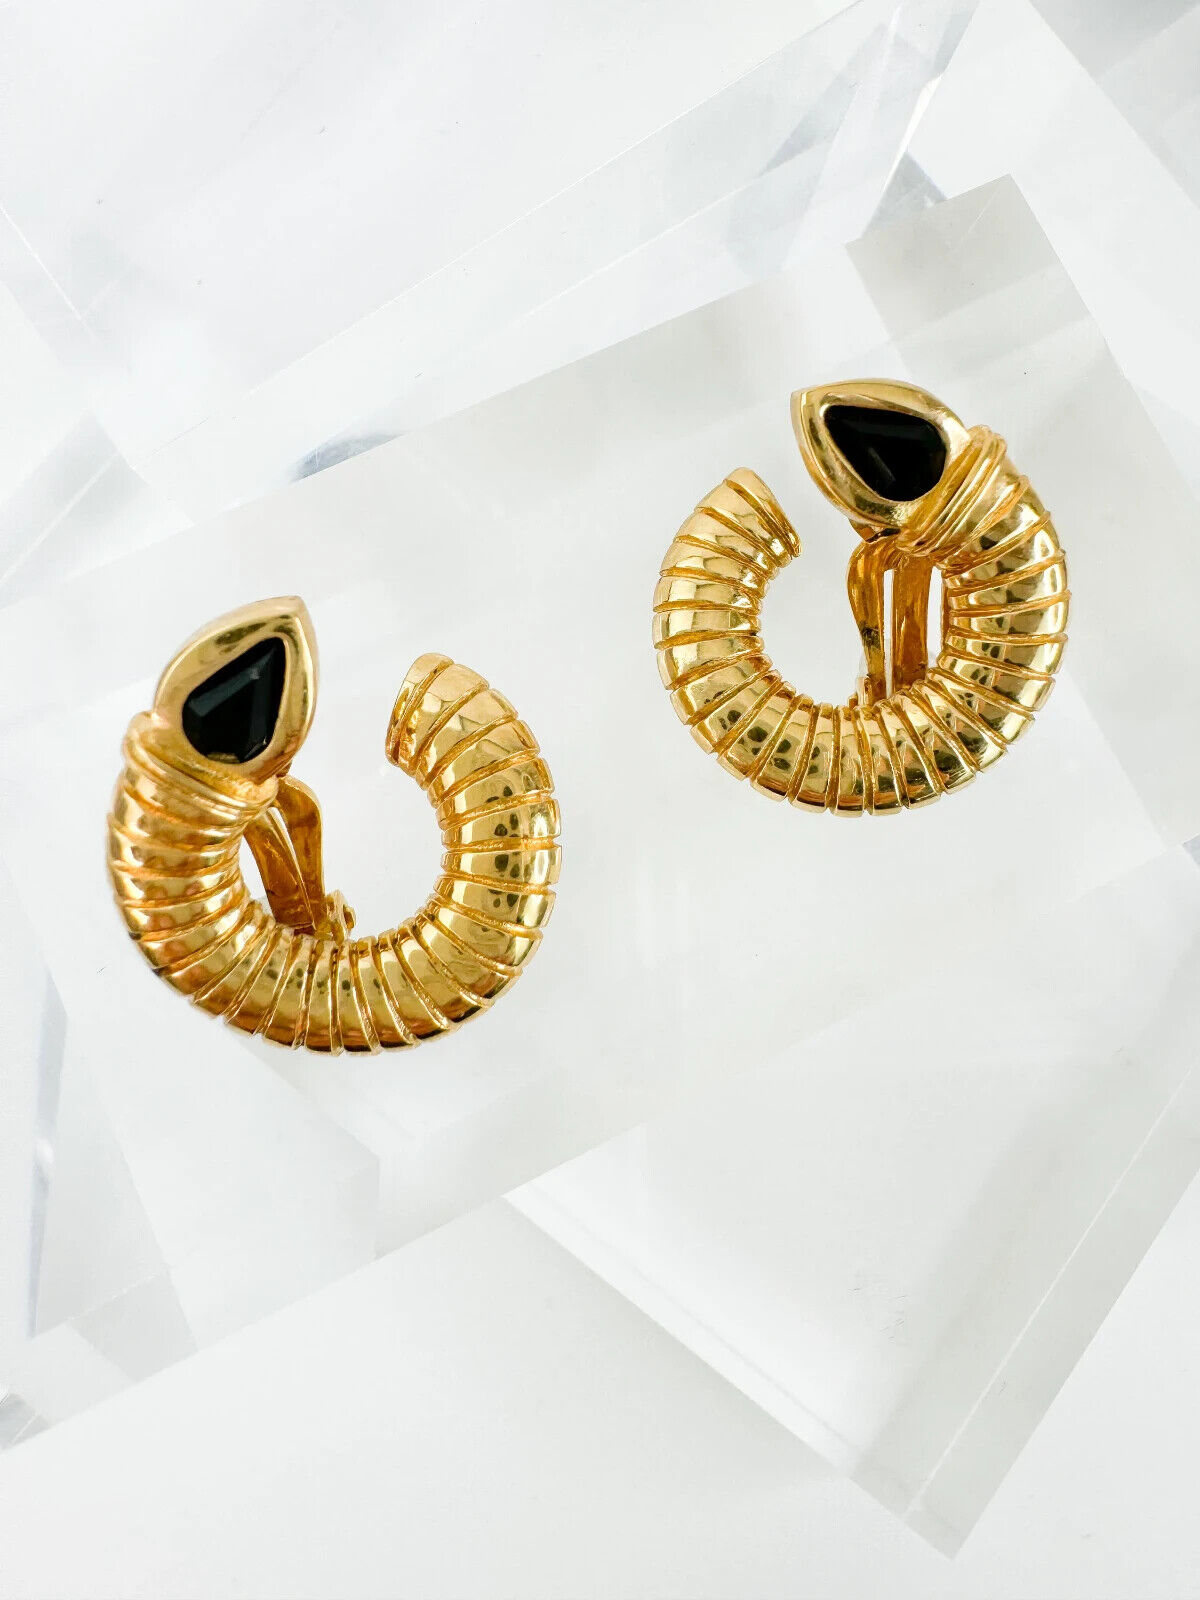 Givenchy gold Serpent  Earrings, Vintage Earrings, 18k Bridal Jewelry, Gold earrings, Wedding Jewelry, Jewelry for Women, casual vintage